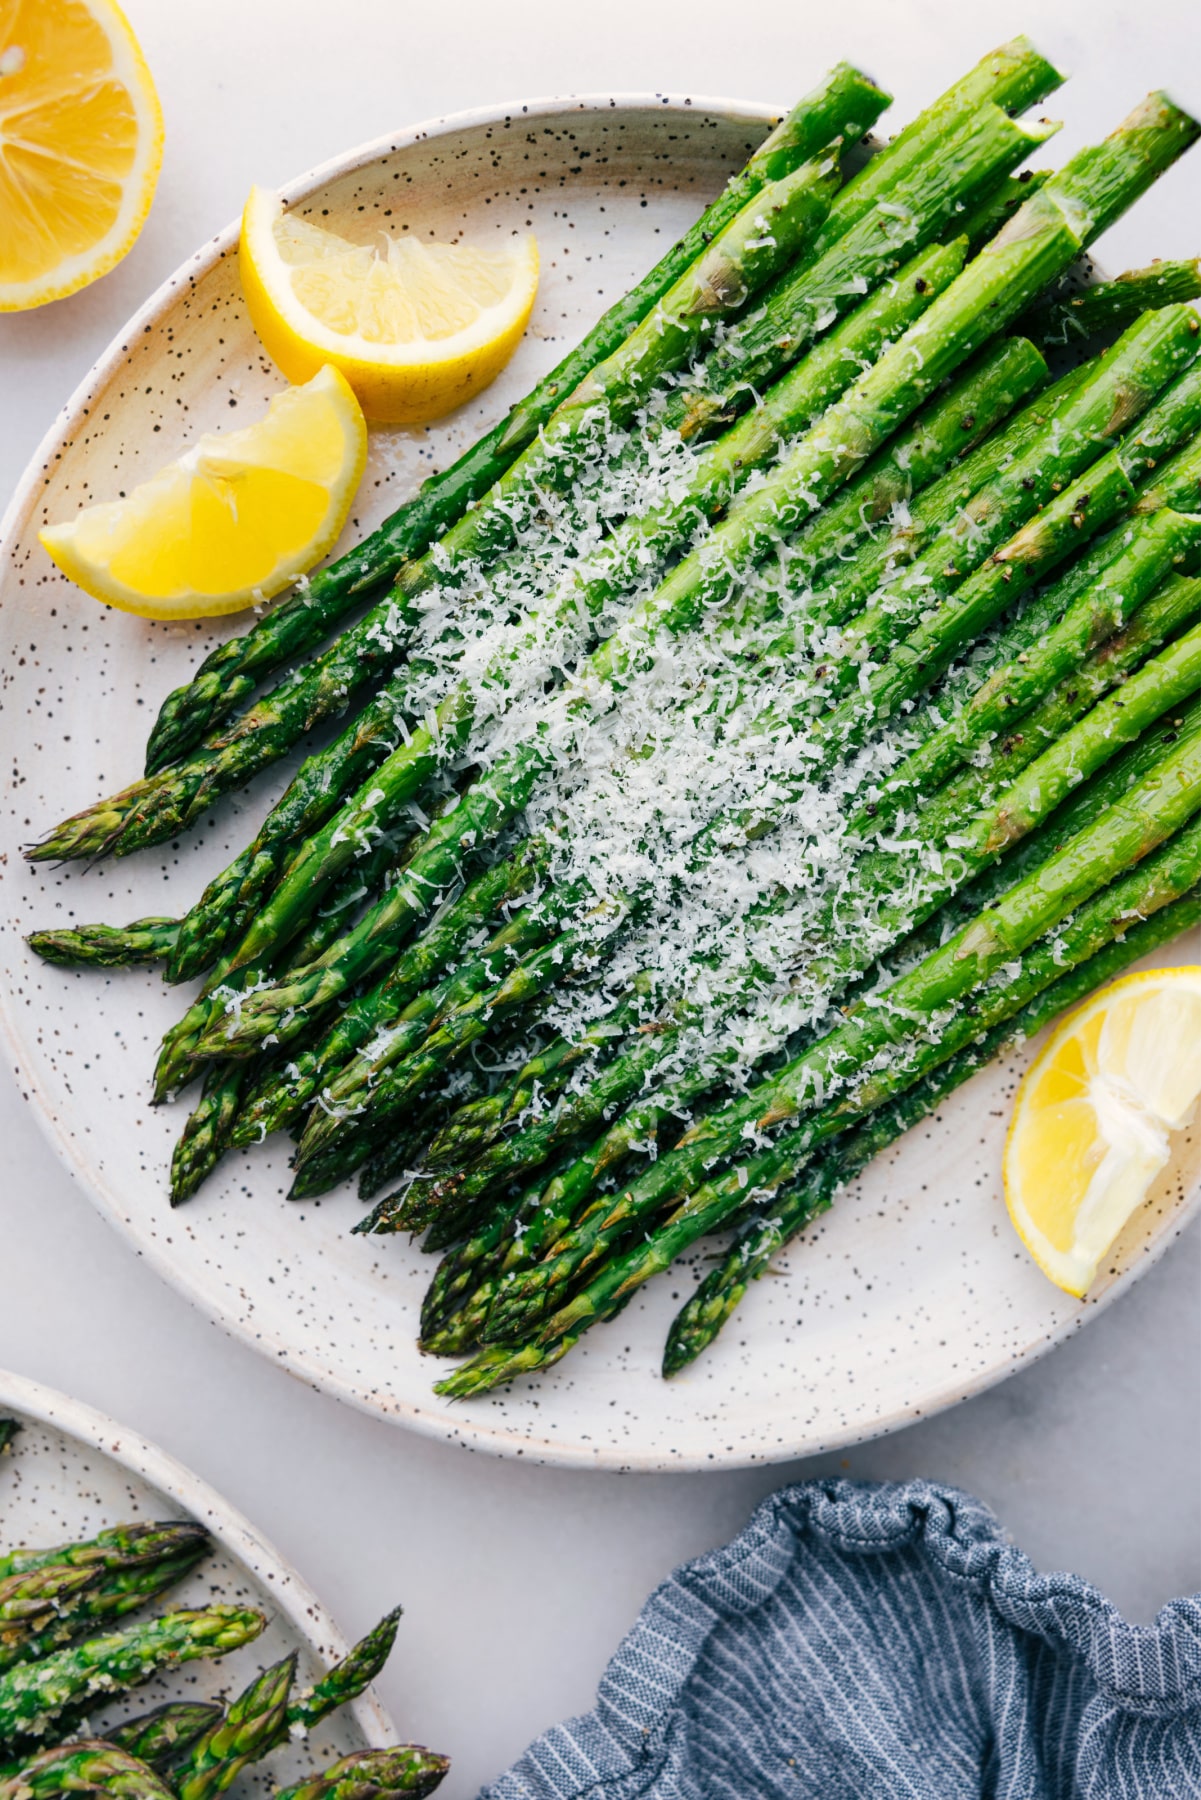 Easy roasted asparagus with fresh parmesan cheese and lemon slices.